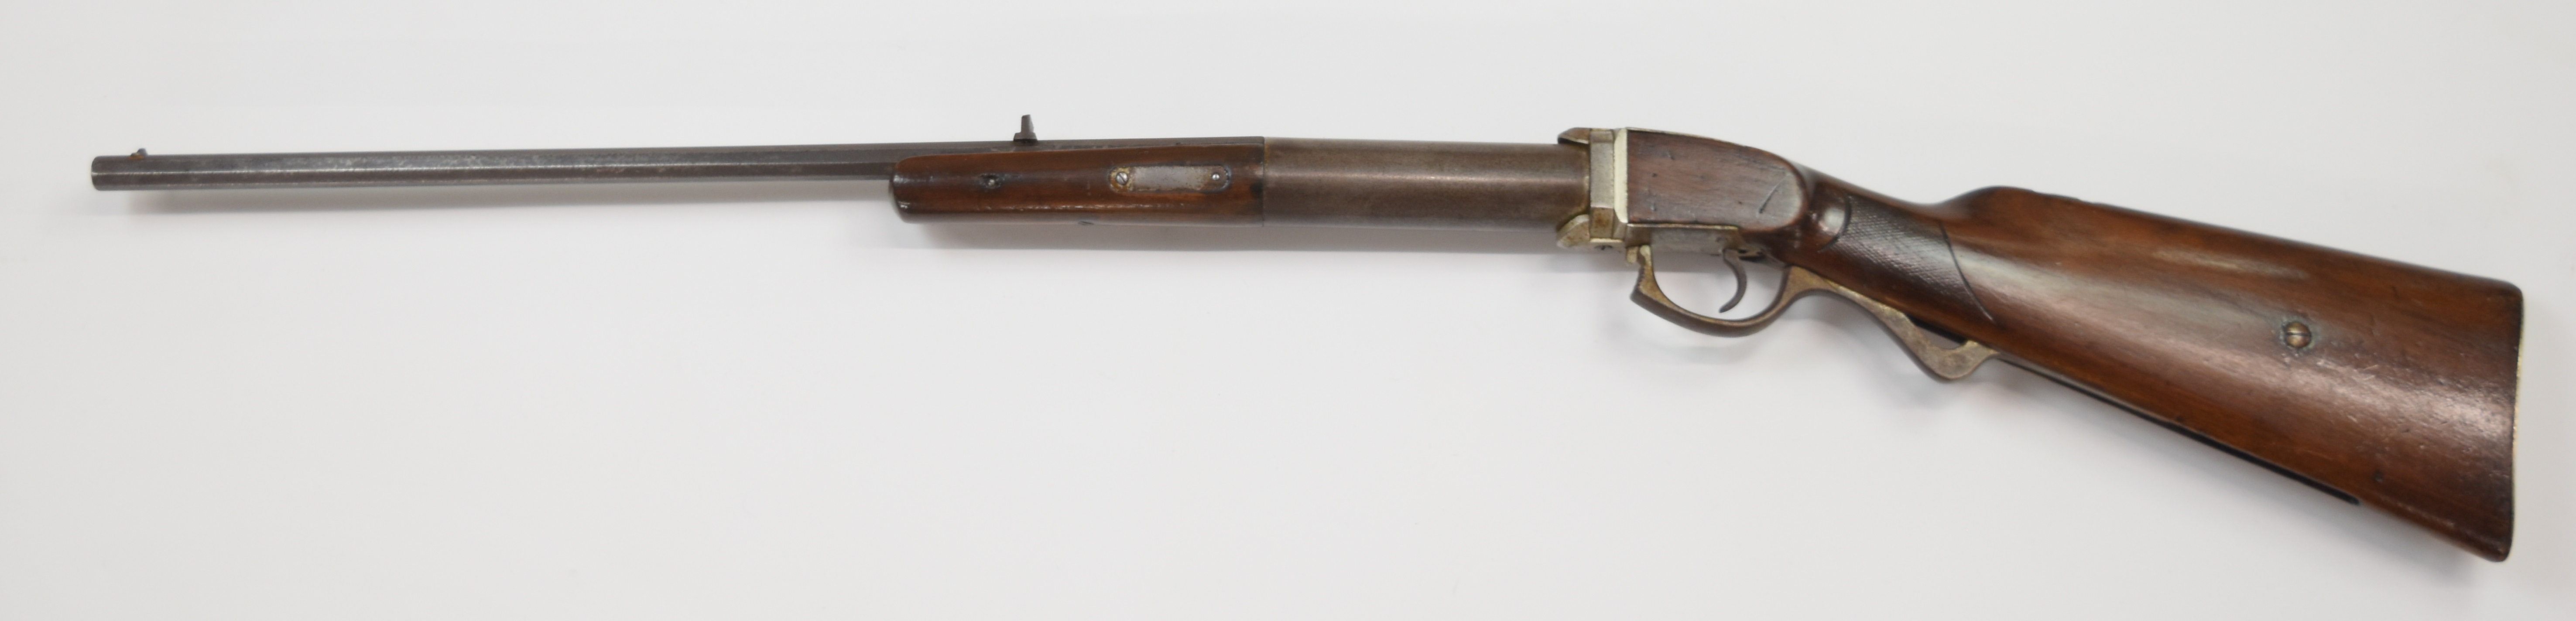 Oscar Will Bugelspanner .22 air rifle with trigger guard under-lever, chequered grip, metal butt - Image 6 of 9